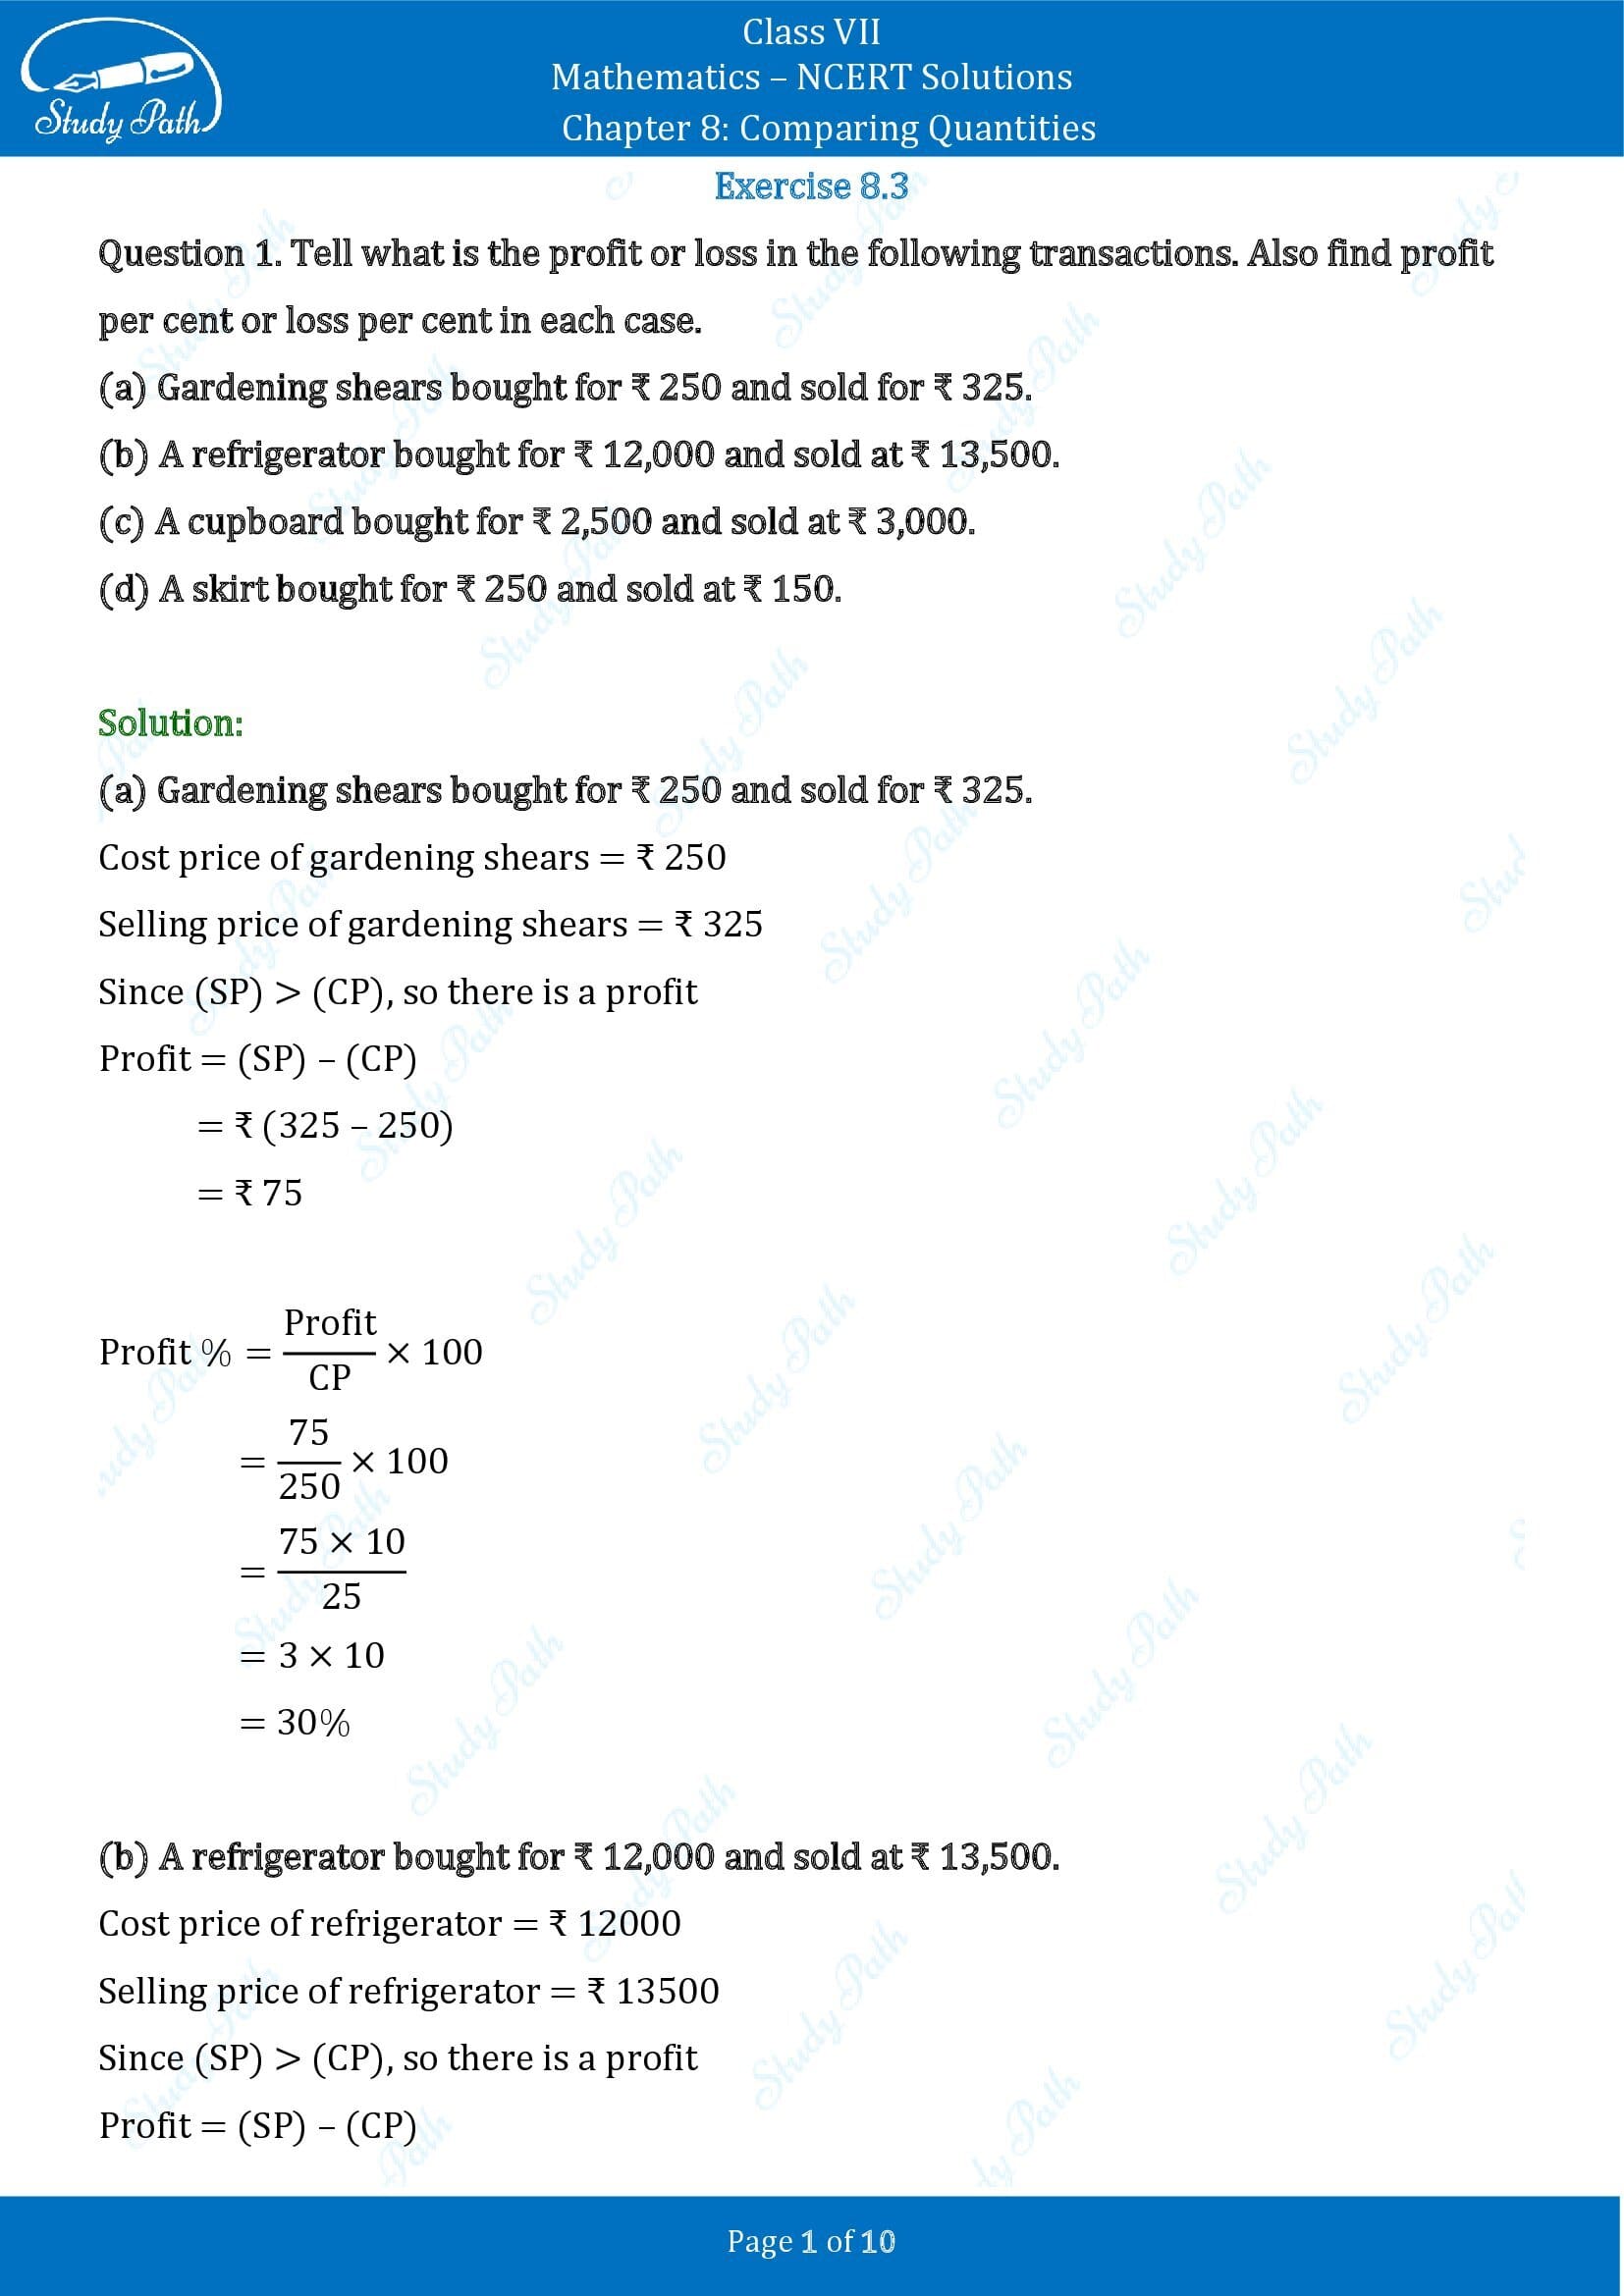 NCERT Solutions for Class 7 Maths Chapter 8 Comparing Quantities Exercise 8.3 00001